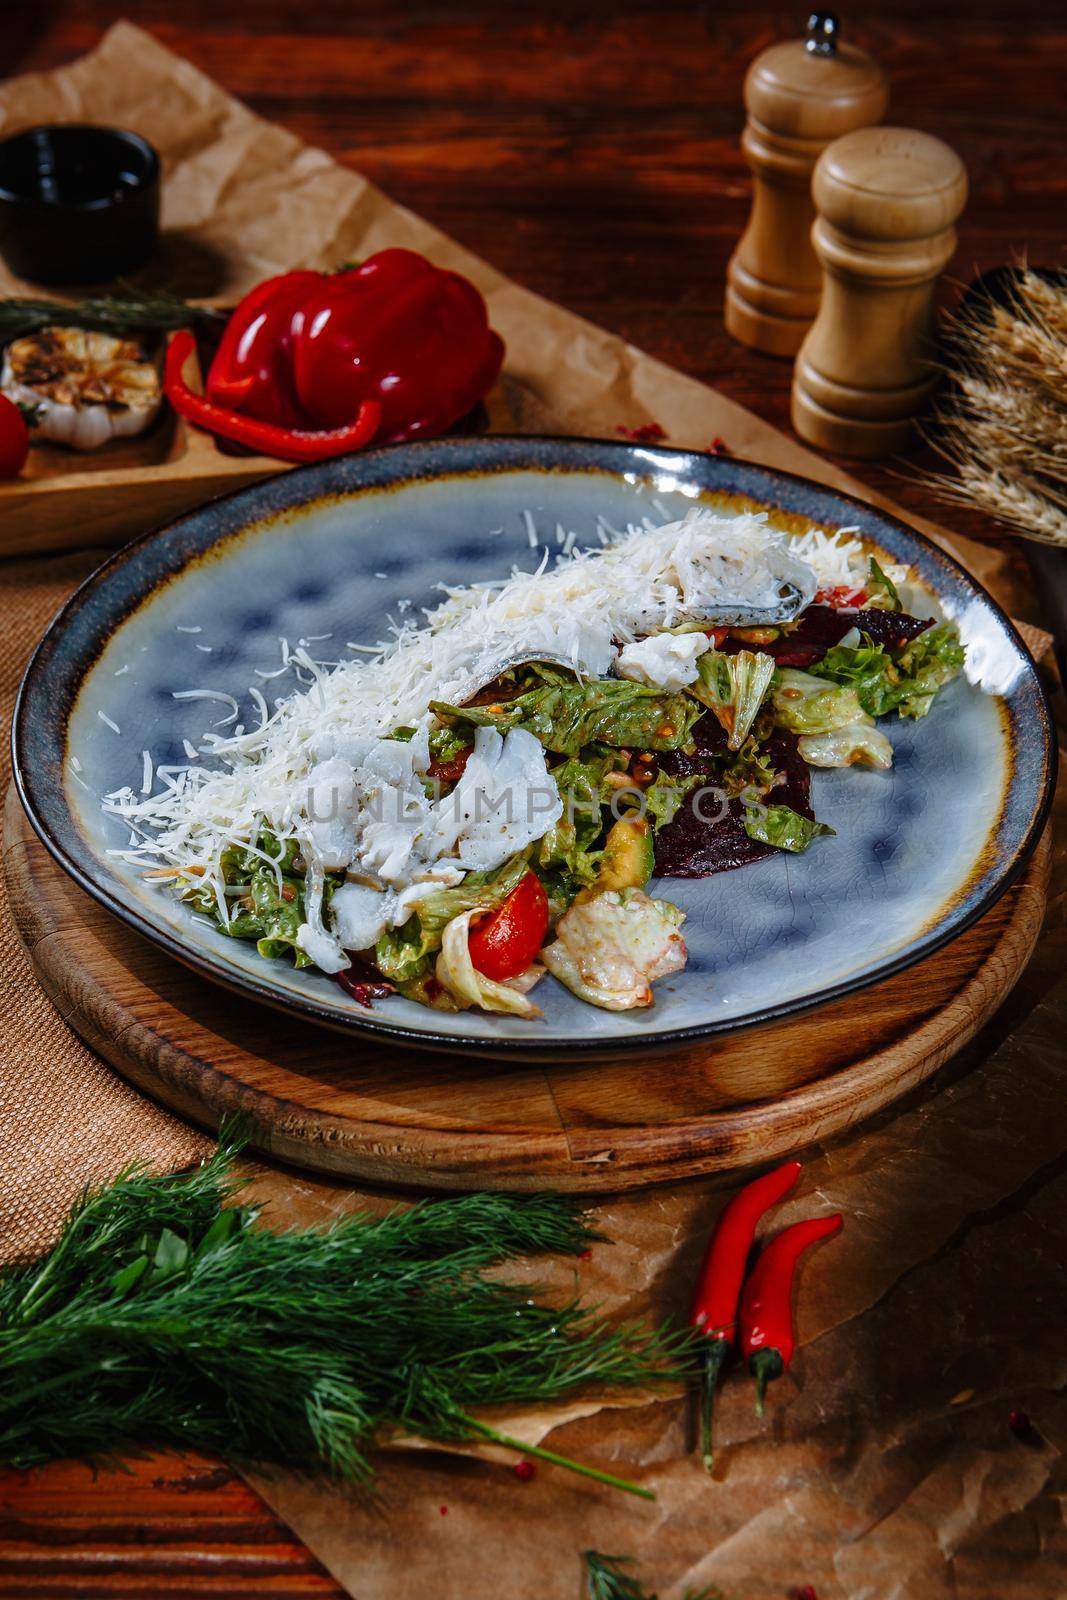 Salad of green and cheese leaves. Lightly fried vegetables, top view by deandy